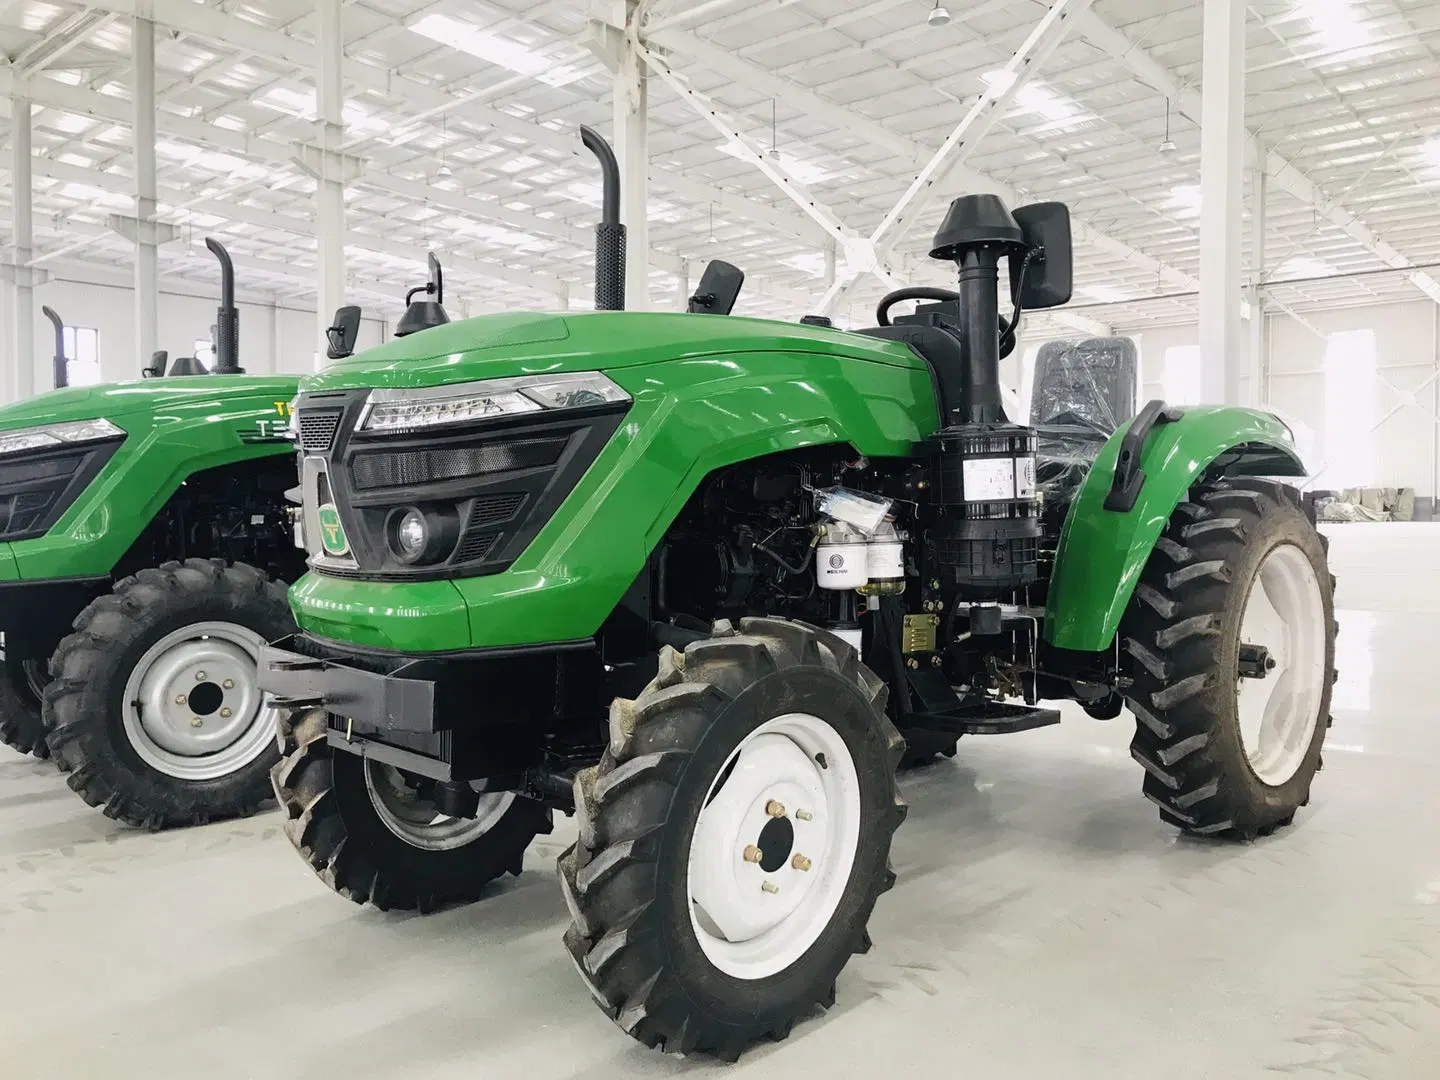 454 Farm Small Tractors with Power Tillers Agriculture Machine Like John Deere 4WD Wheel Mini Tractor with Rotary Cultivator Agricultural Machinery for Farm